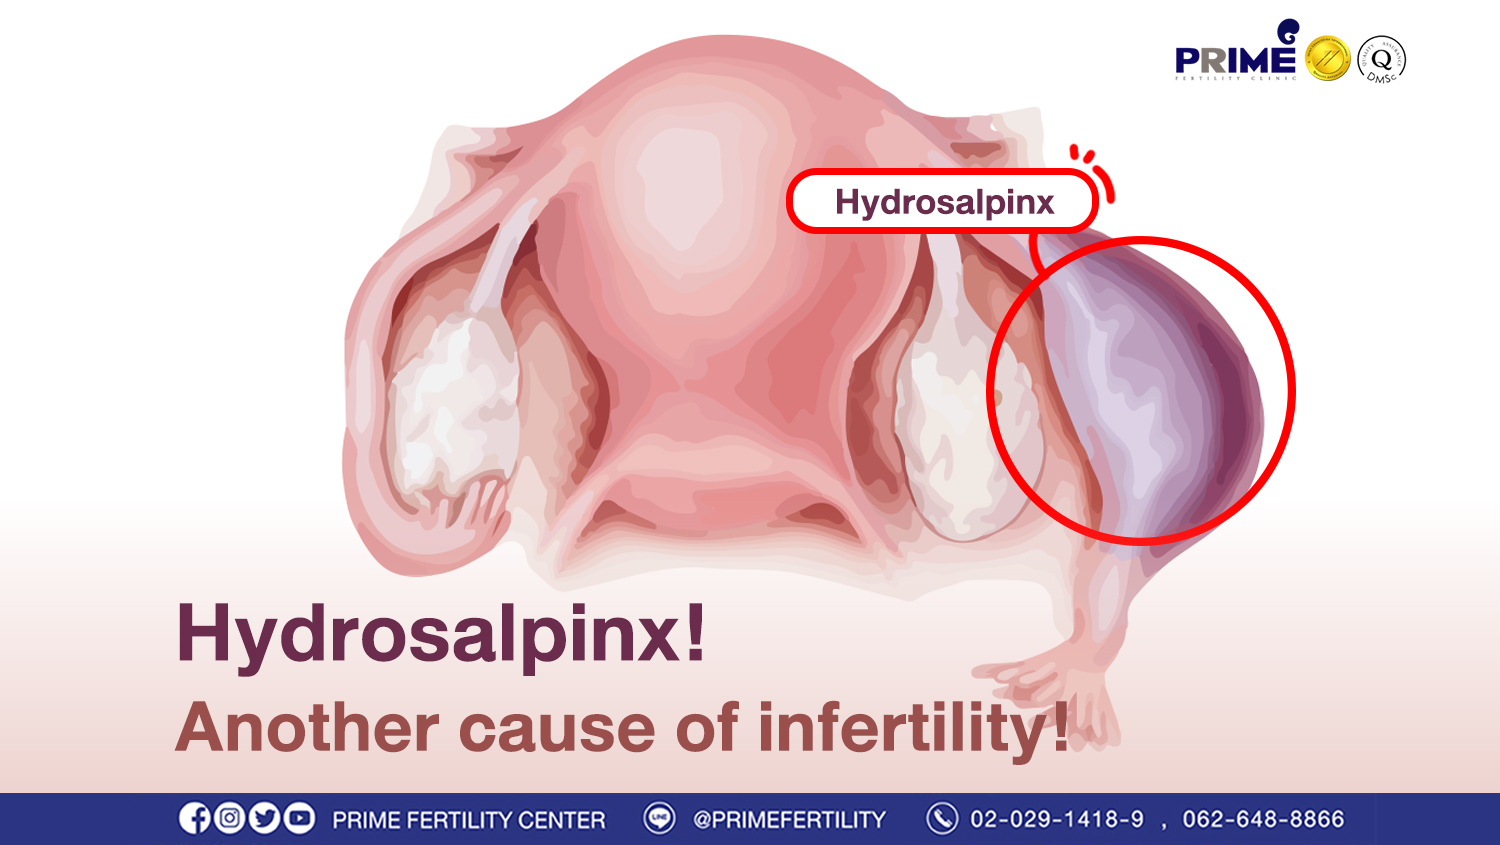 Hydrosalpinx! Another cause of infertility!